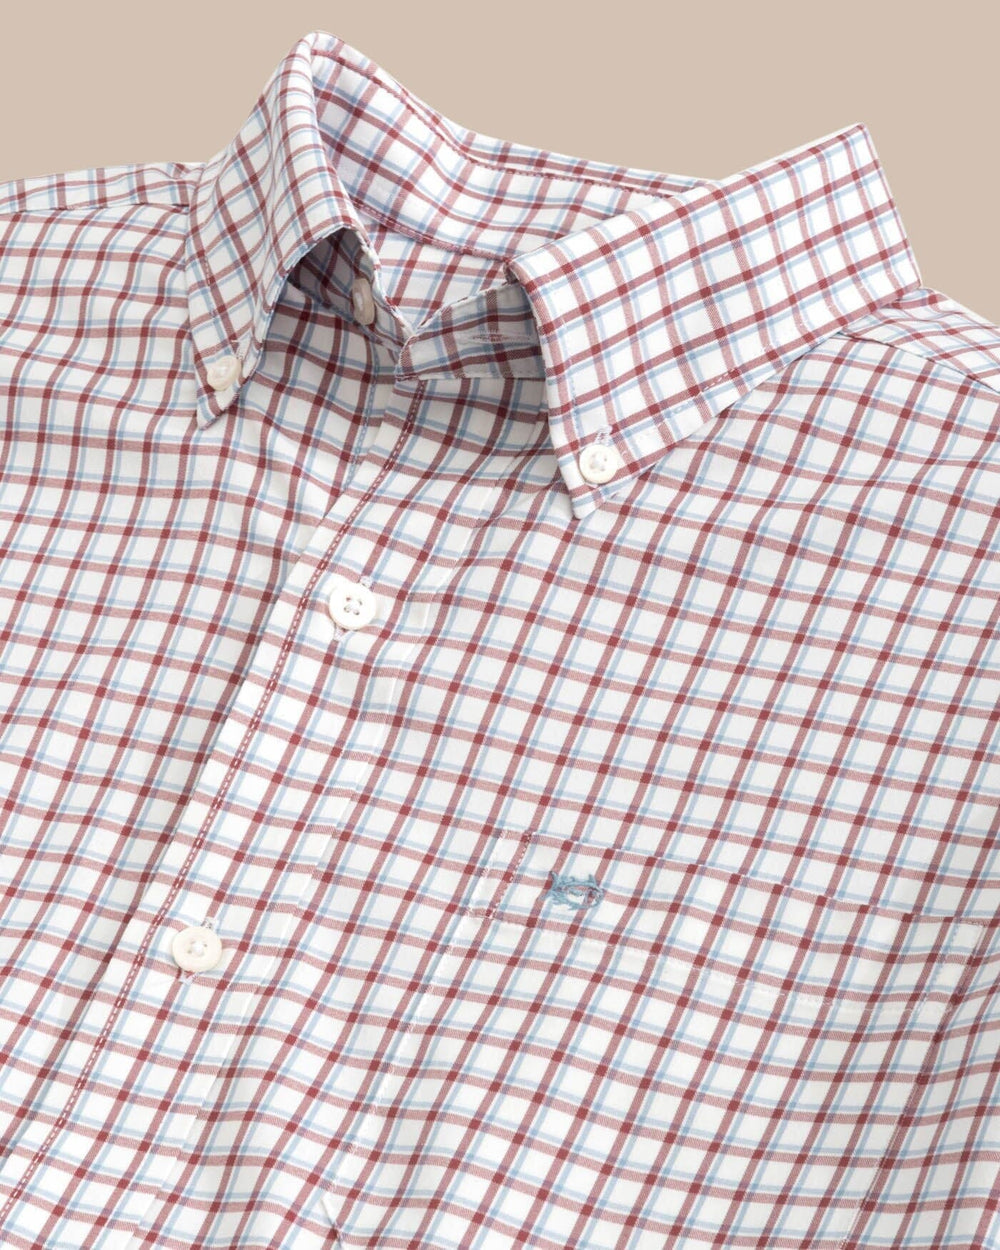 The detail view of the Southern Tide Bellevue Plaid Sport Shirt by Southern Tide - Tuscany Red